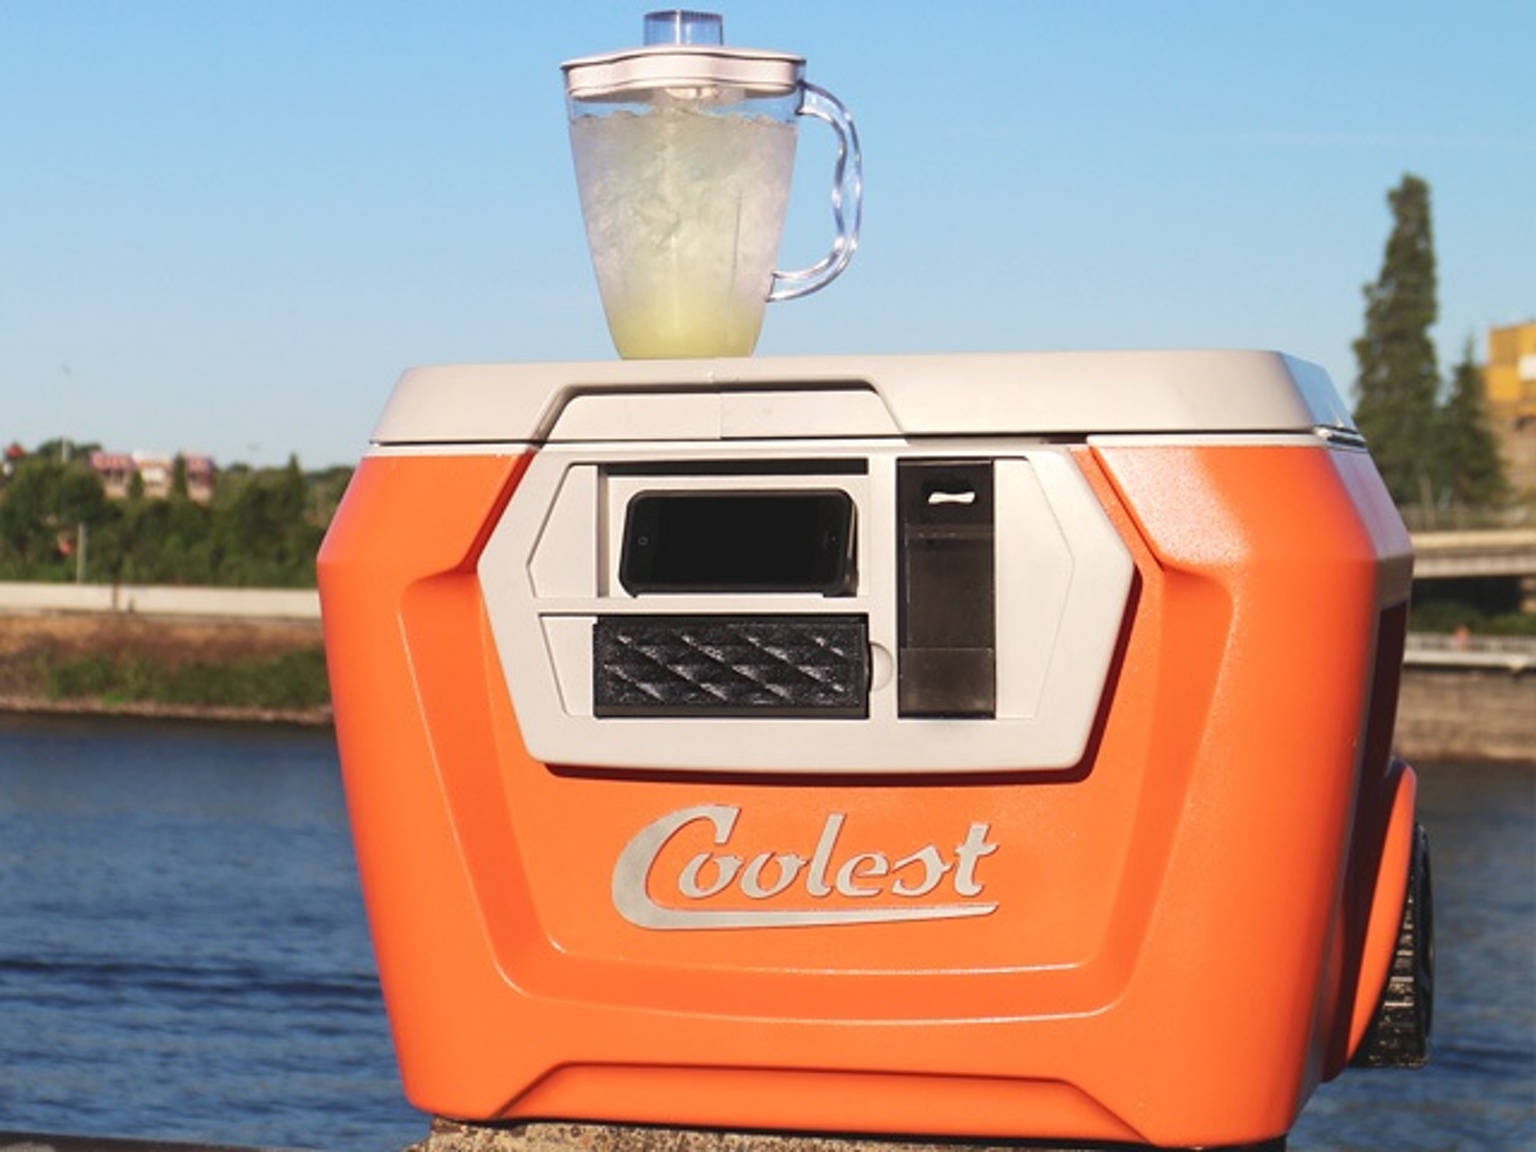 Coolest Tells Kickstarter Backers That Coolers Are Further Delayed